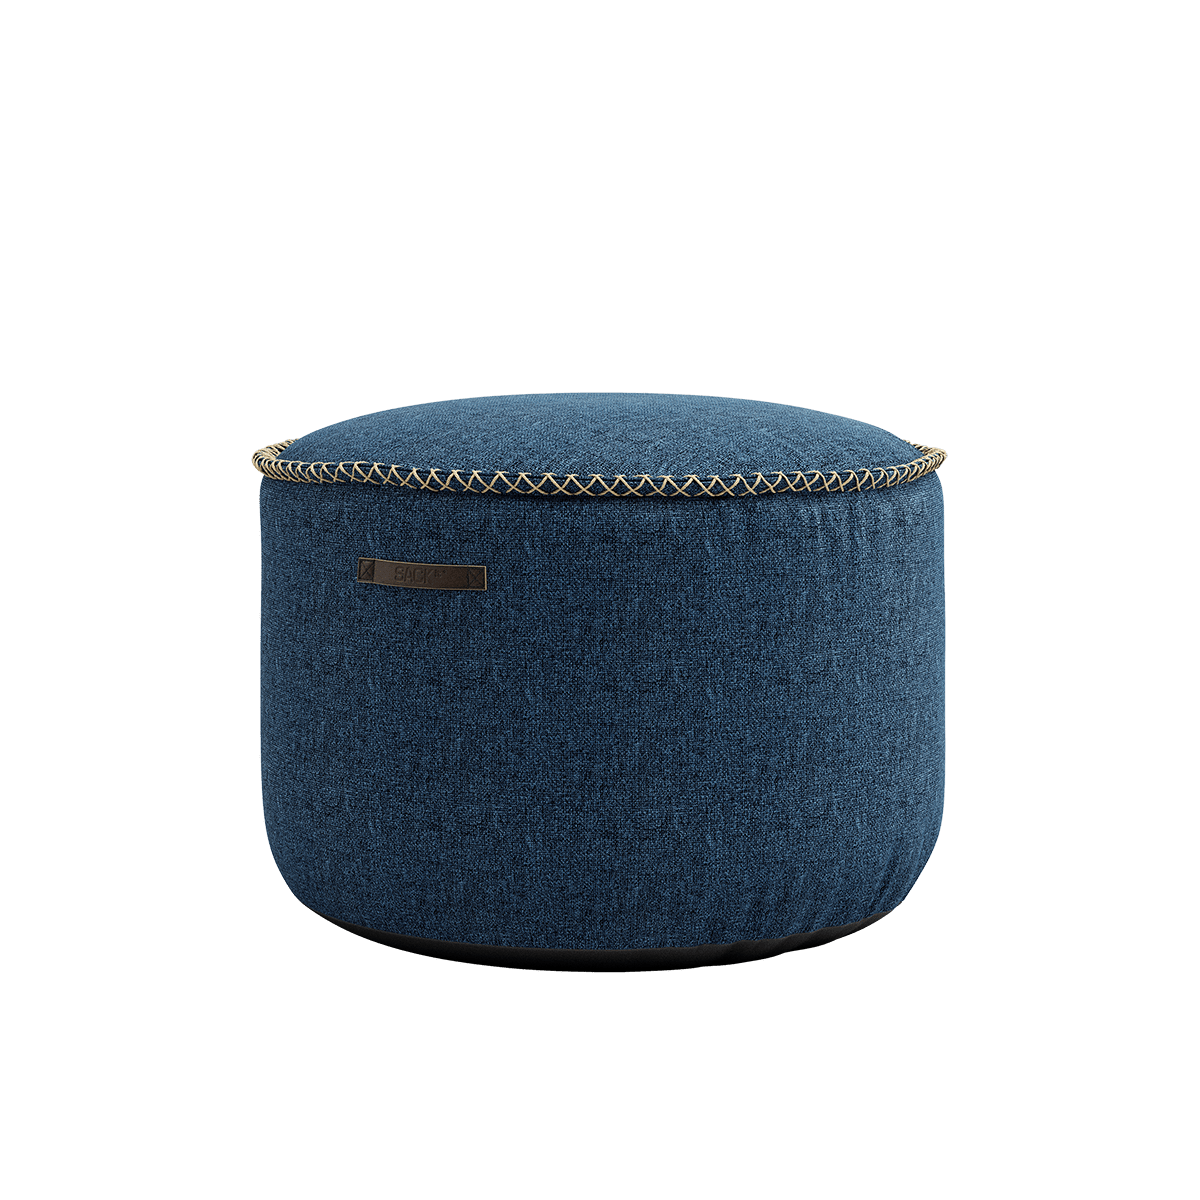 variant_8567013% | Medley Pouf [Contract] - Medley Denim | SACKit